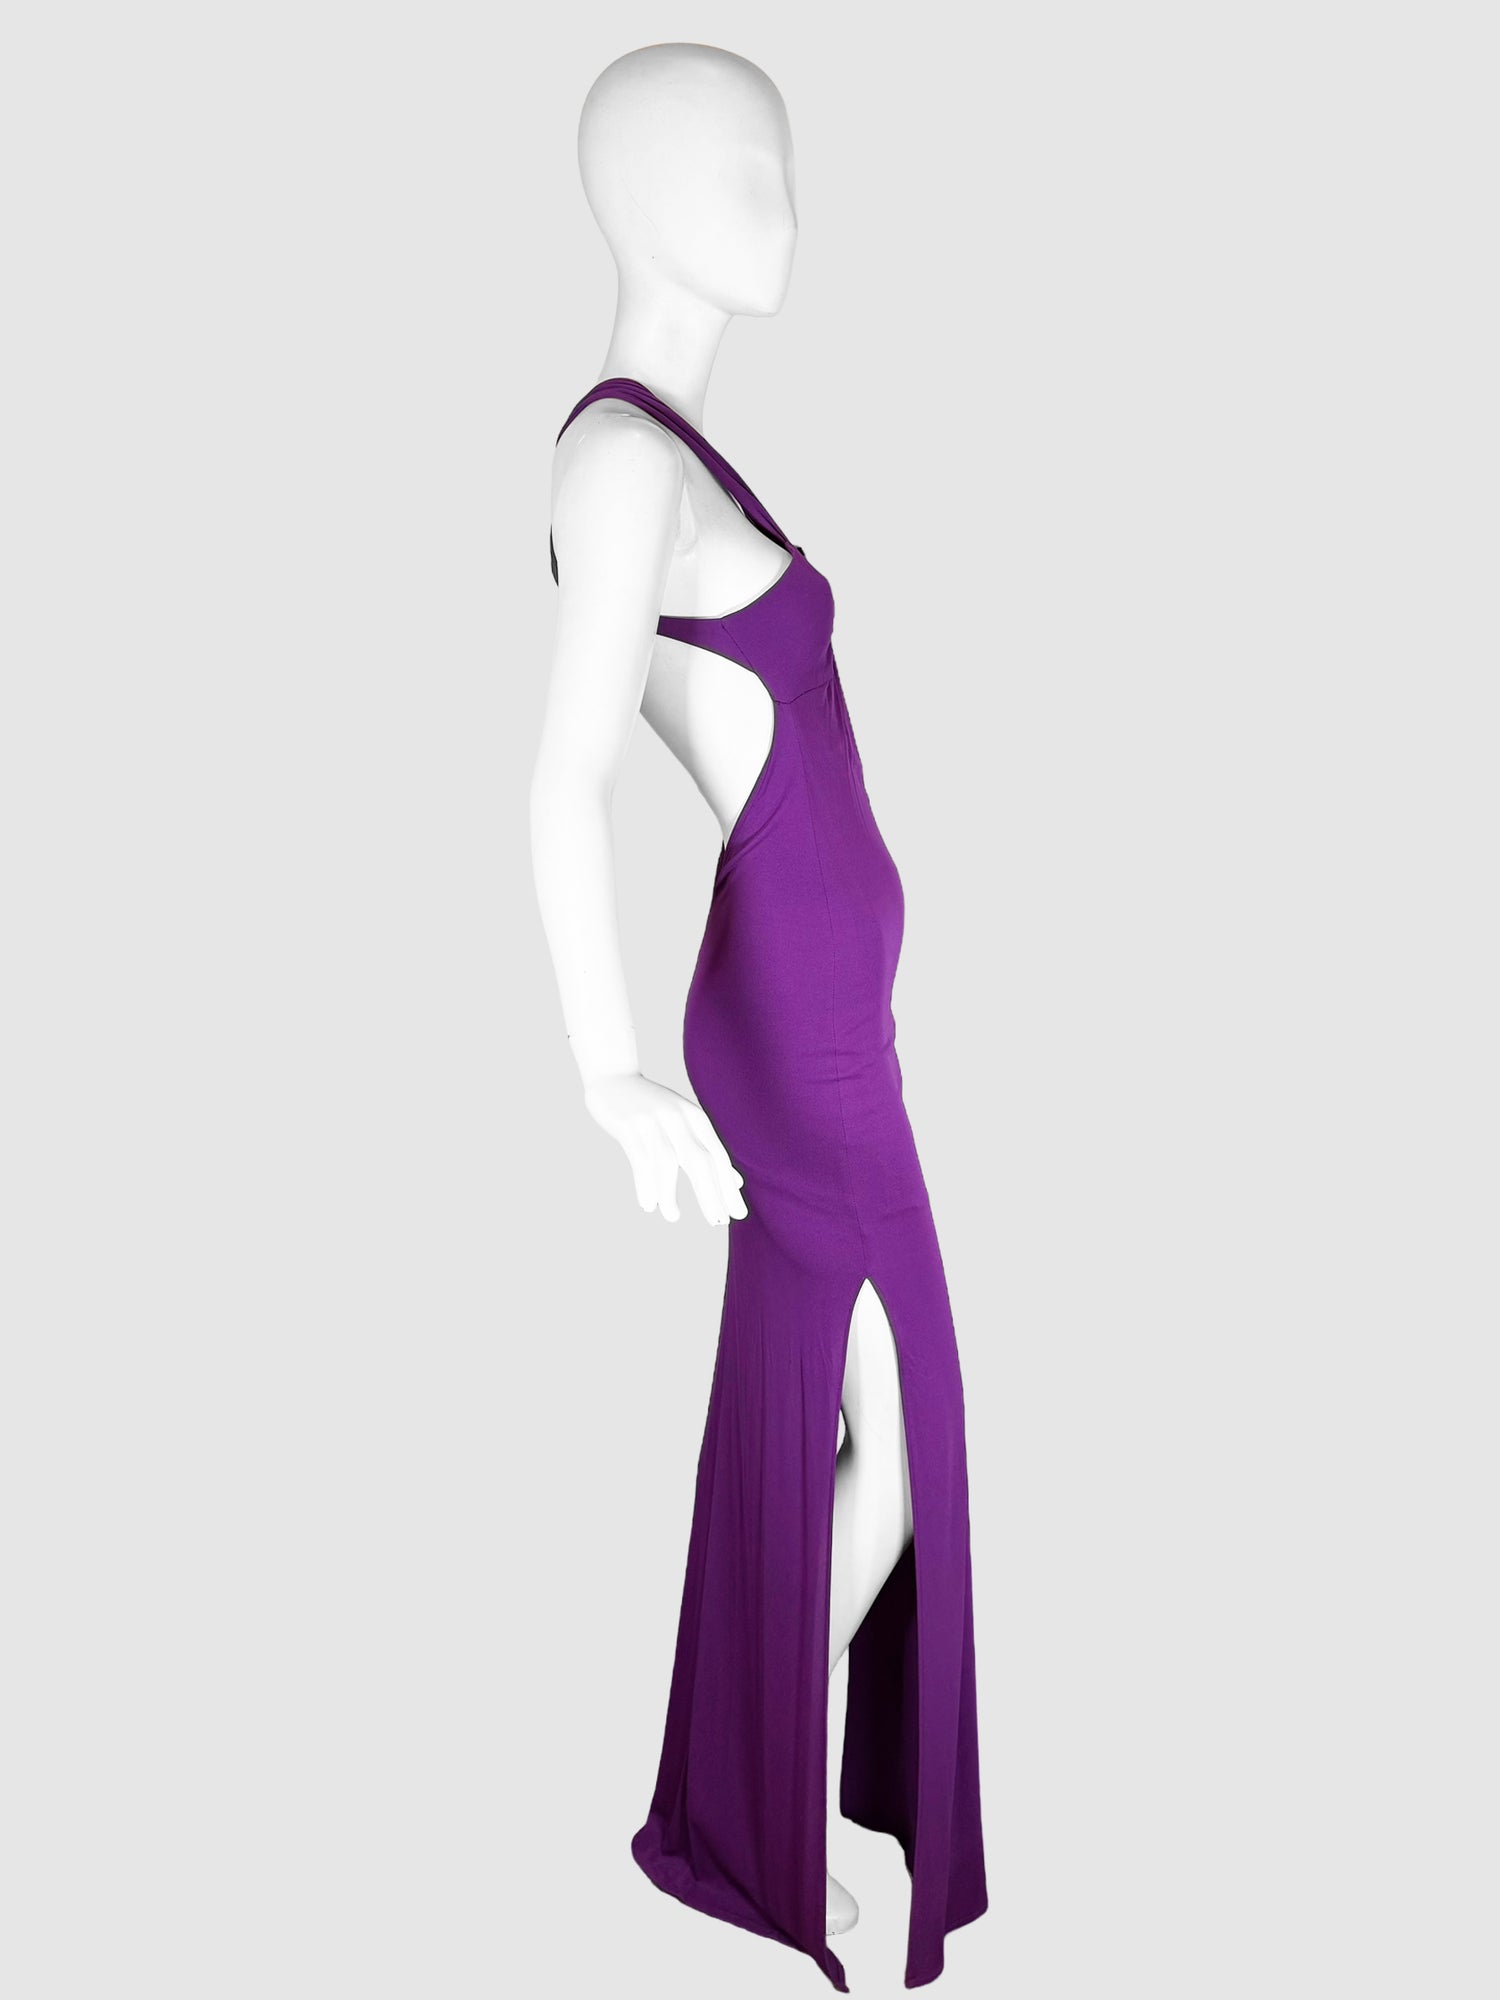 Roberto Cavalli Purple Plunge Neckline Long Dress with Halter Neck, Cutouts and Buckle Accent, Size 40